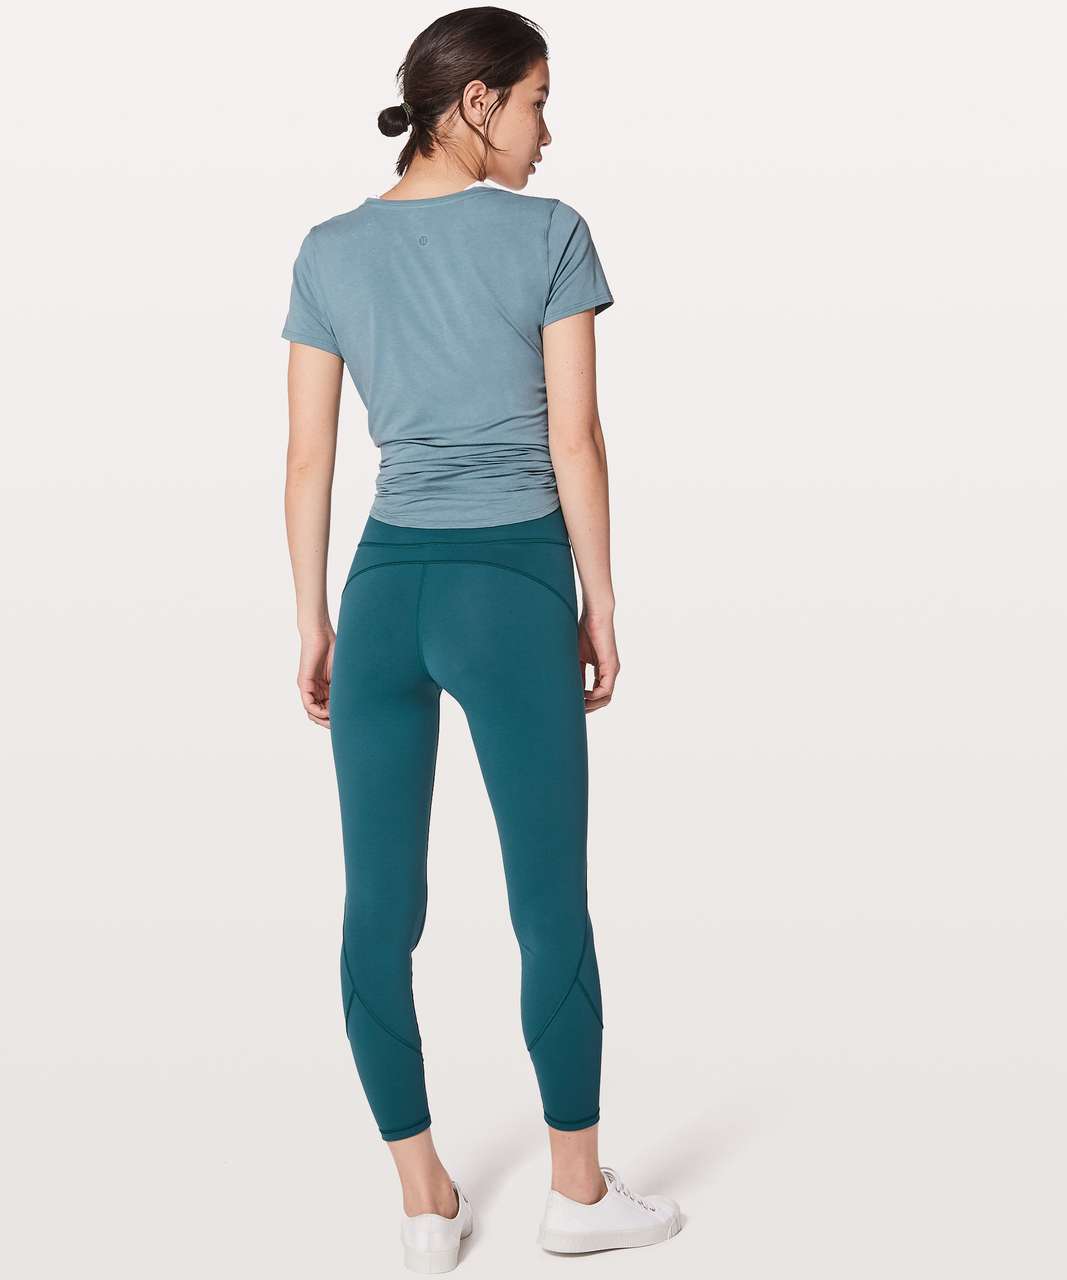 NWOT - Lululemon In Movement Tight 25 7/8 *Everlux Mystic Green, SIZE: 10